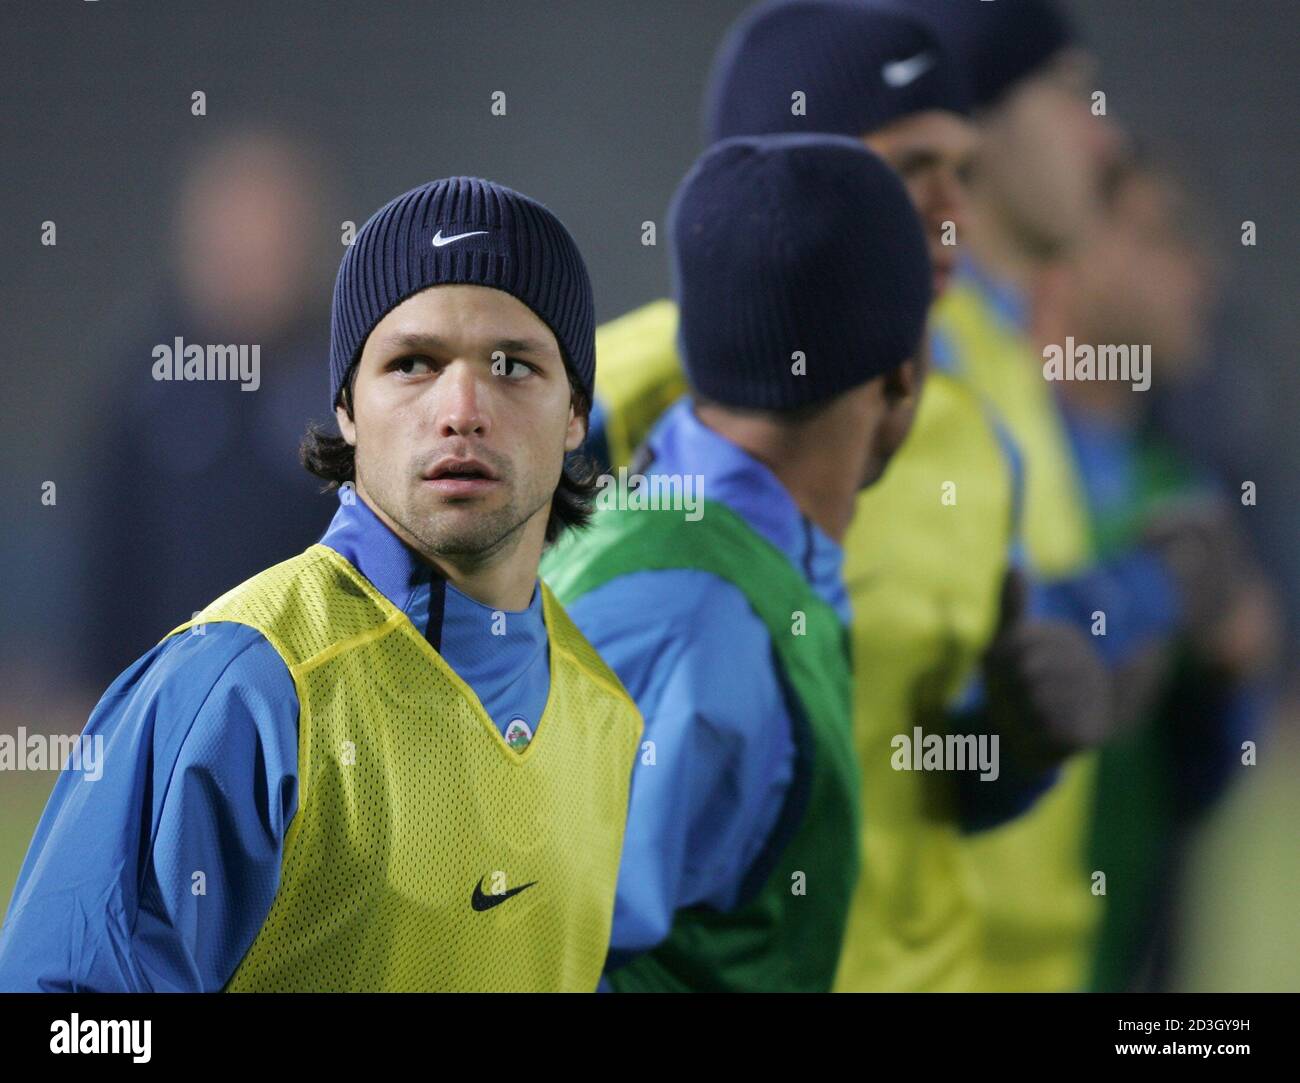 Portuguese FC Porto's midfielder Diego Ribas da Cunha (L) of Brazil and teammates warm up at a practice session in Kawasaki, south of Tokyo December 10, 2004. FC Porto is in Japan for the European-South American Cup club soccer championship against South-American club champion Once Caldas of Colombia on December 12. REUTERS/Issei Kato  IK/FA Stock Photo